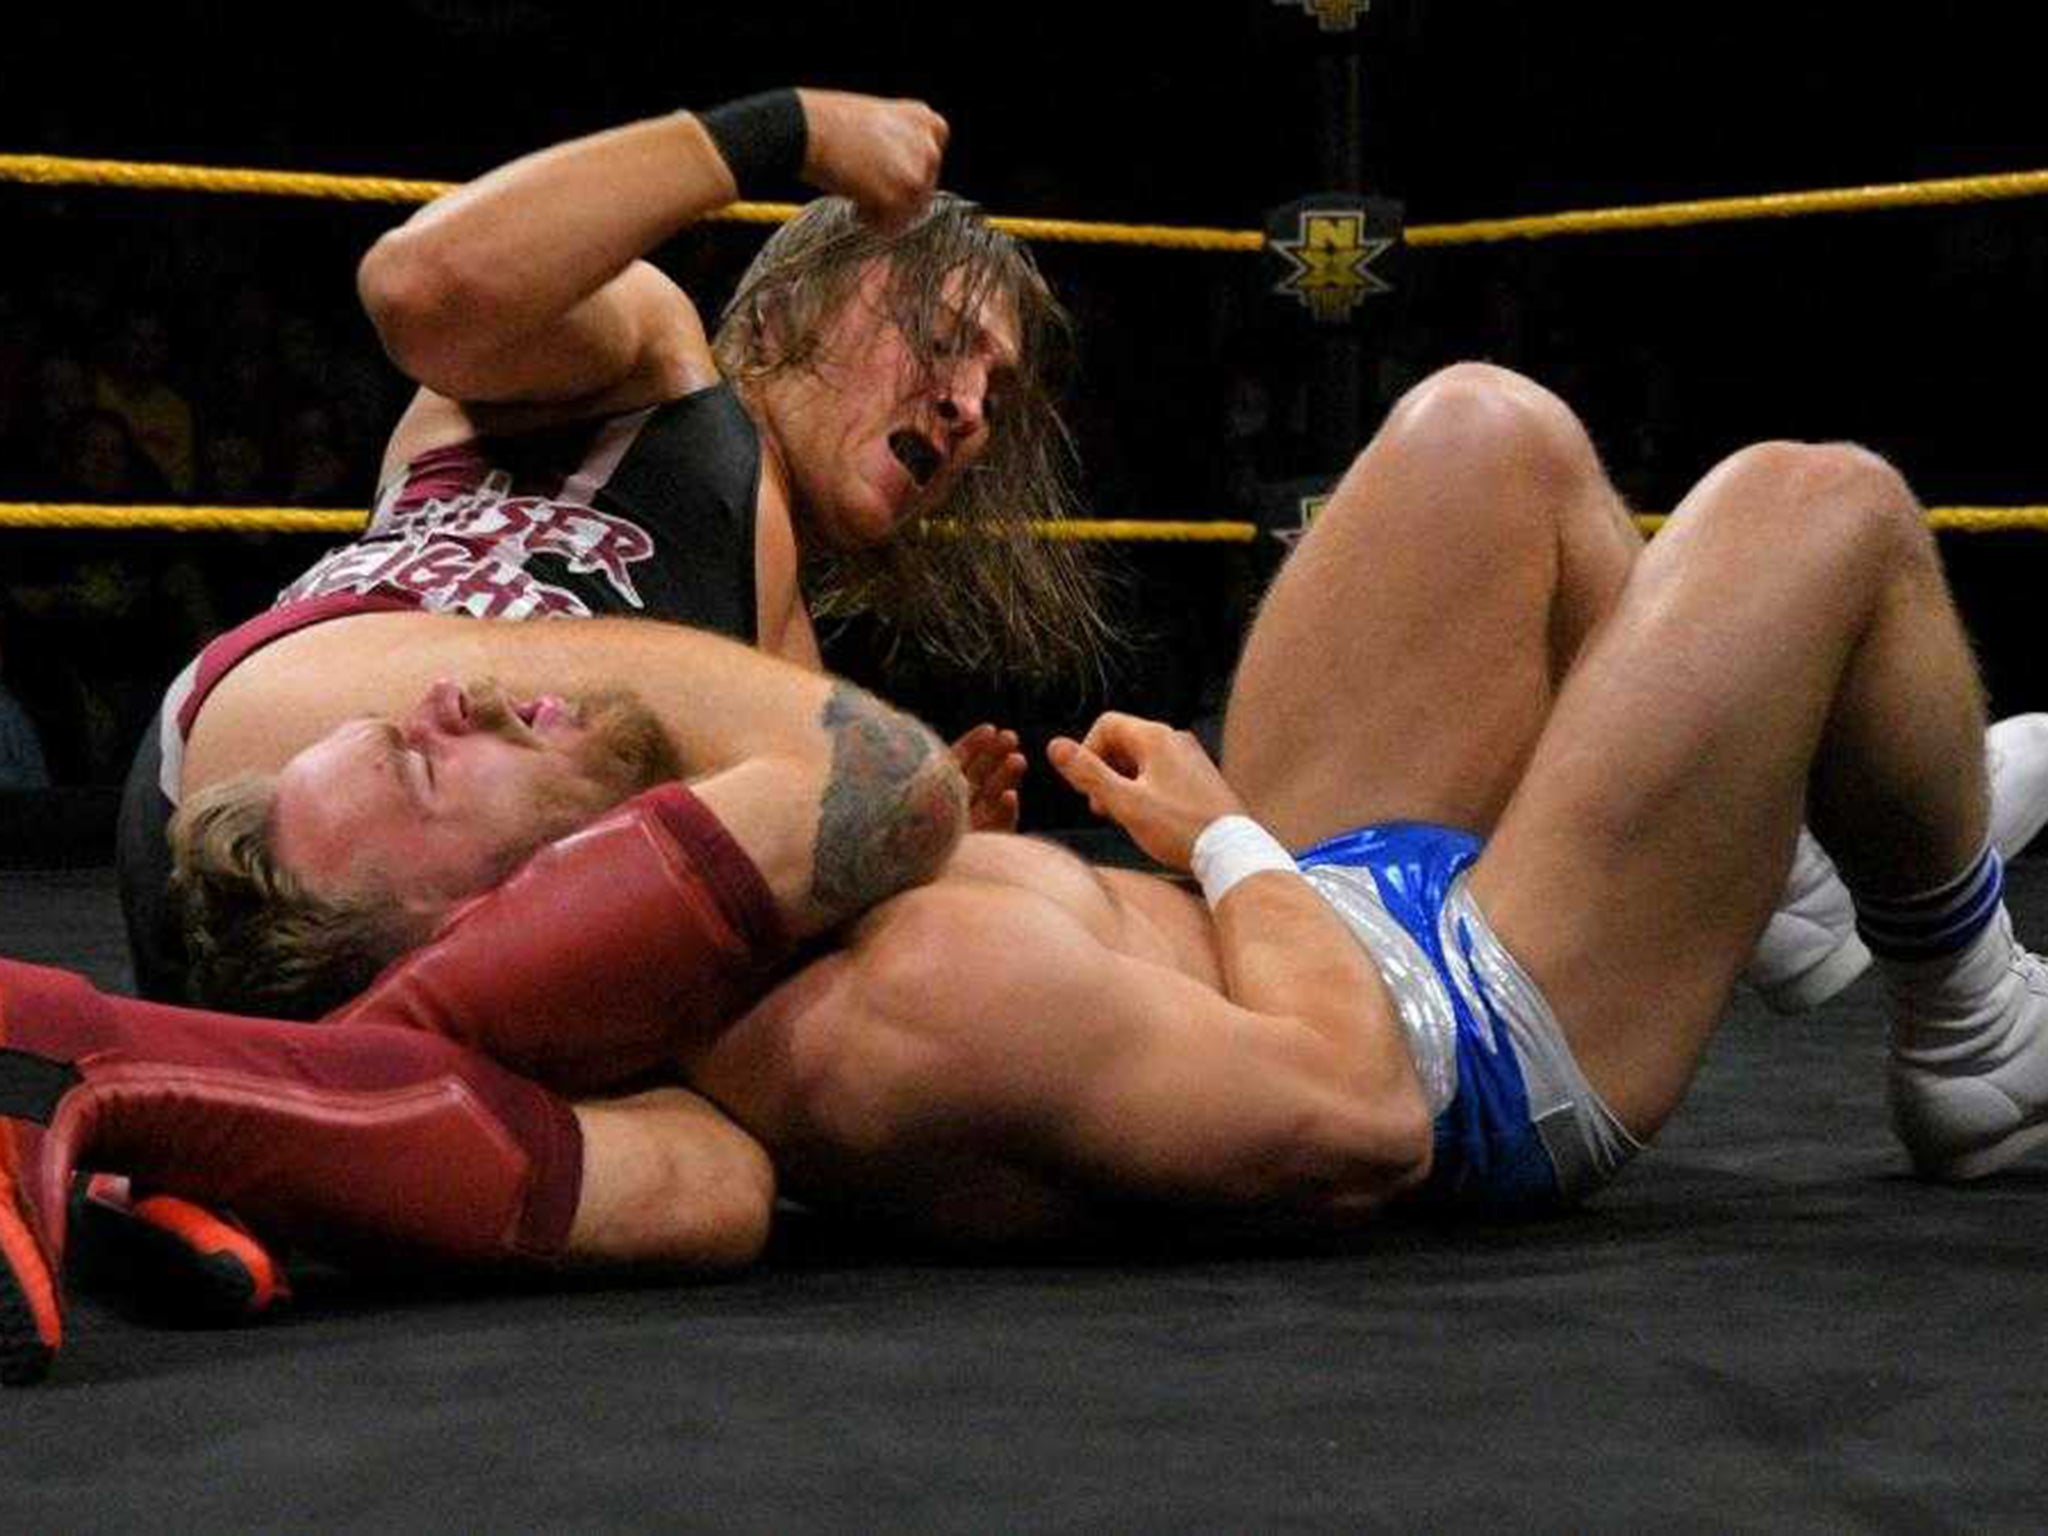 Pete Dunne and Tyler Bate have shown what British talent can do in the WWE